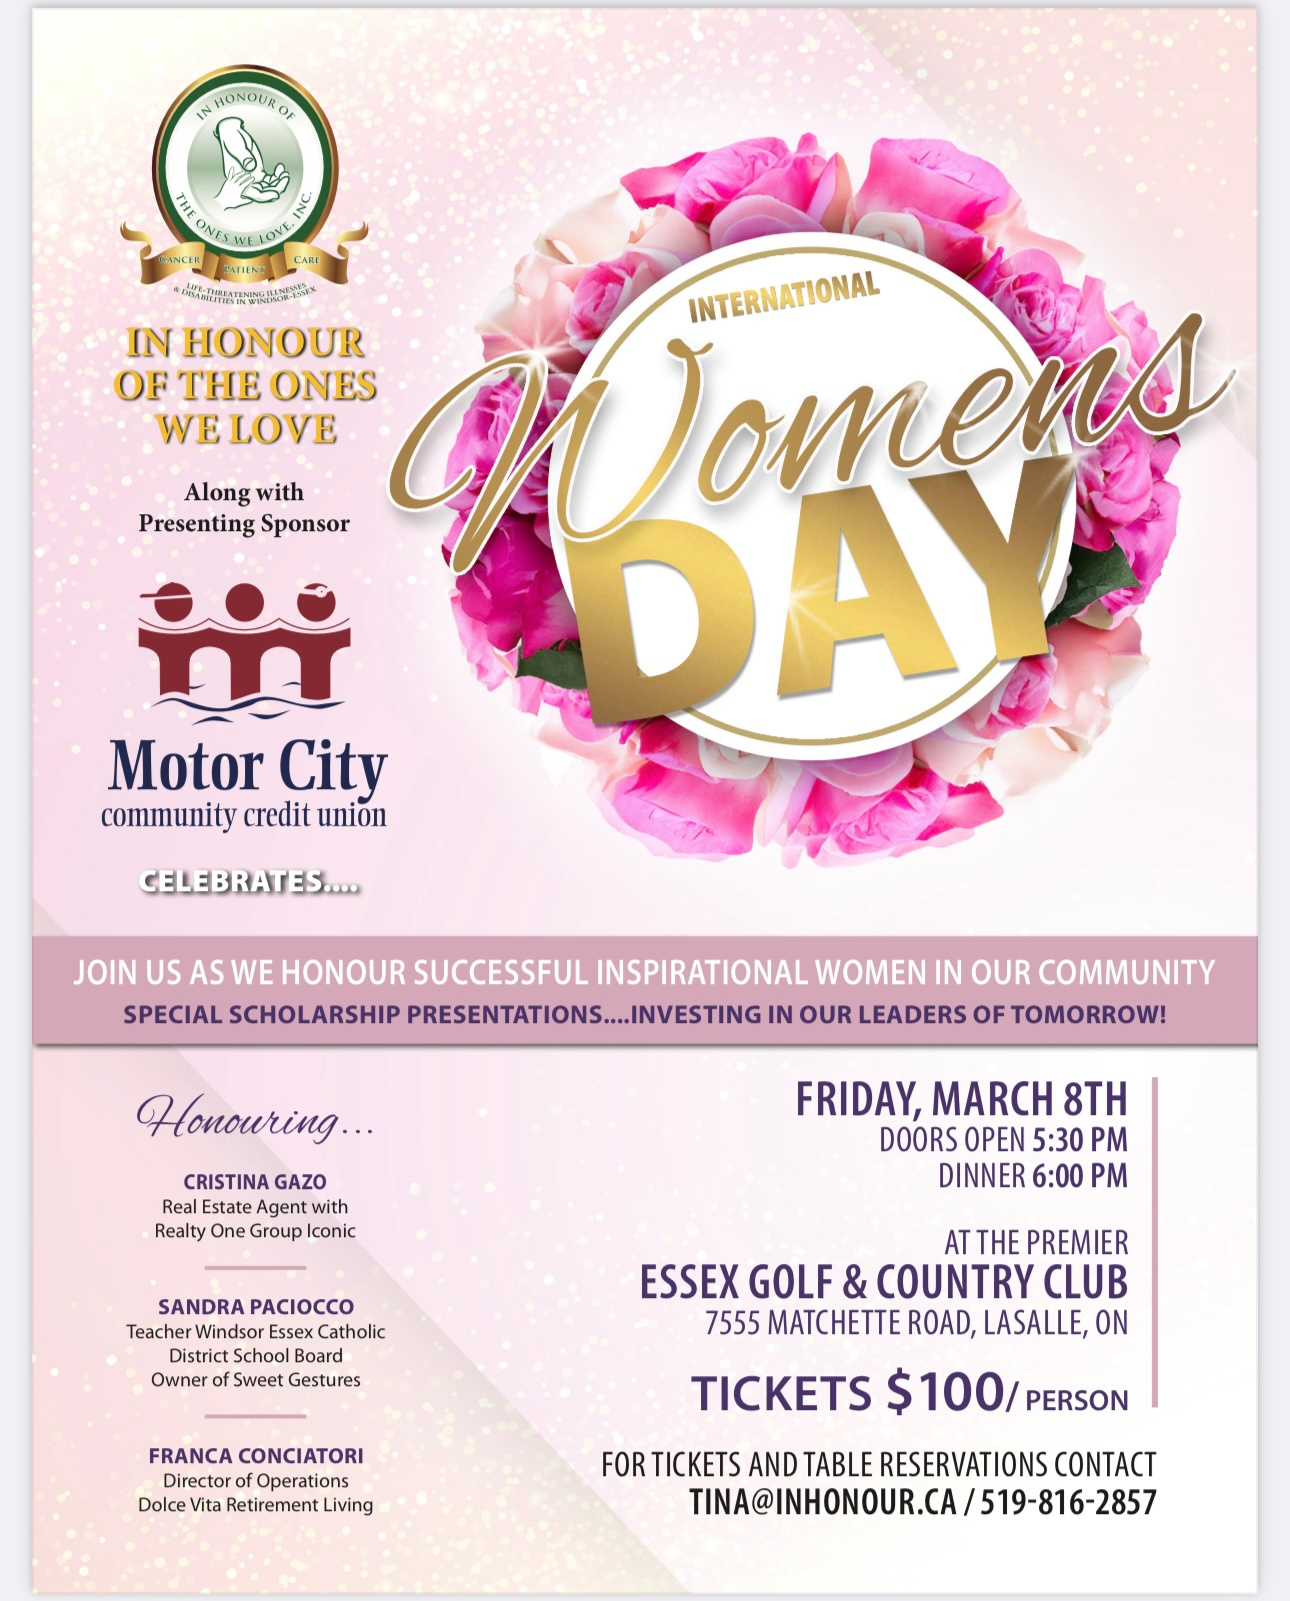 In Honour of the Ones We Love celebrates International Women's Day - Friday, March 8th at the Premier Essex Golf & Country Club. 